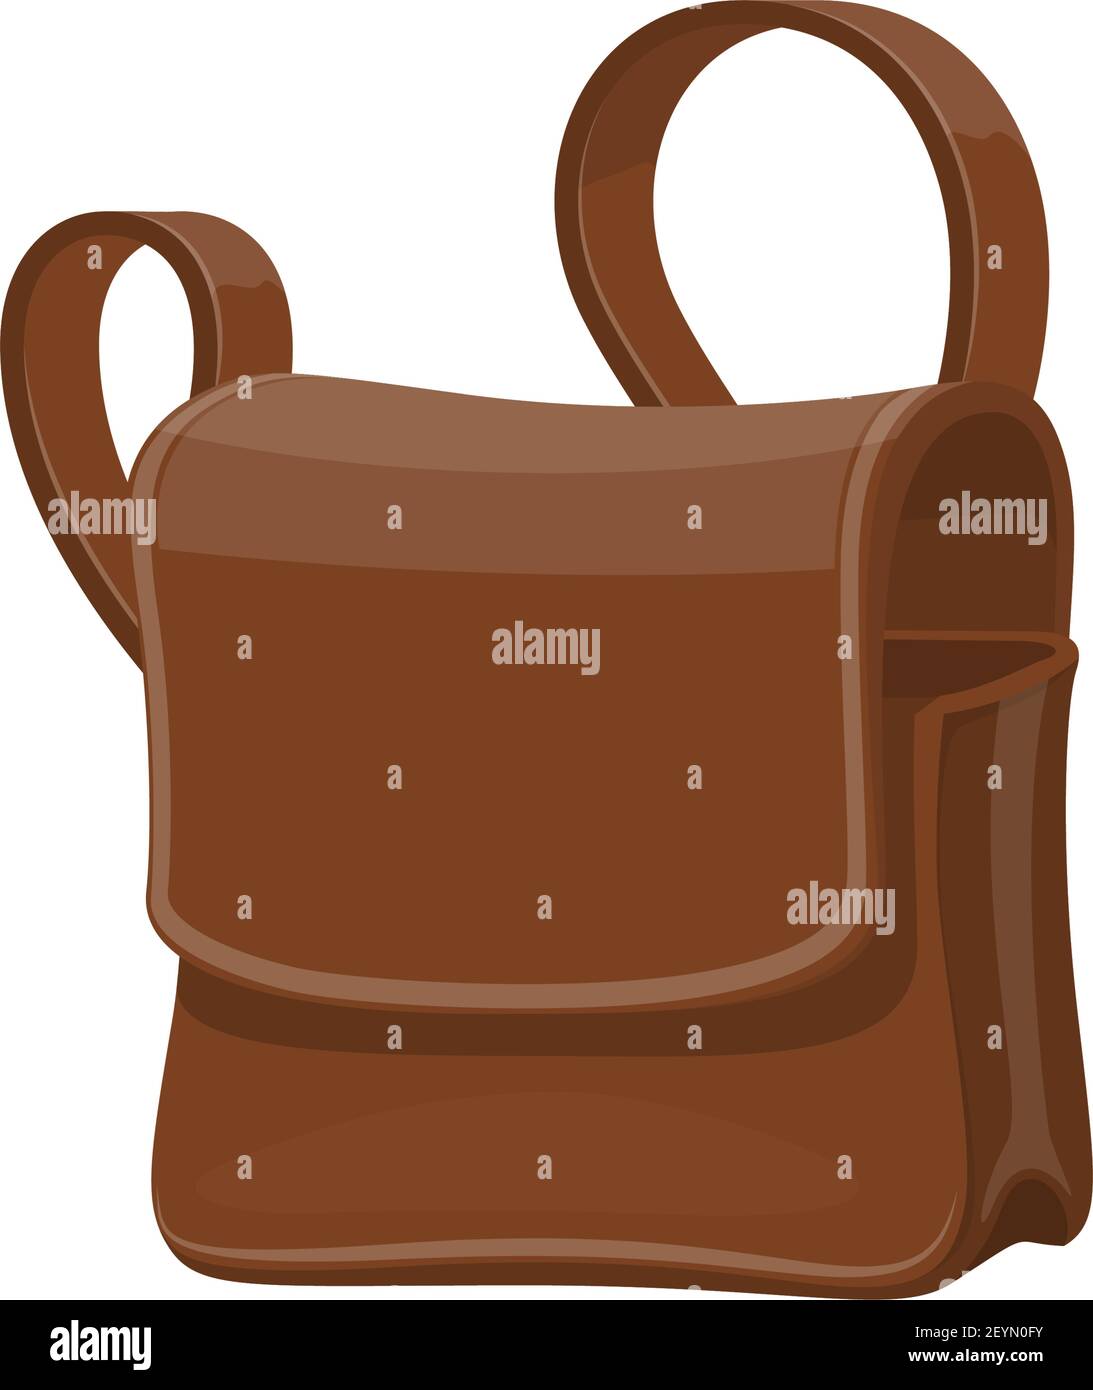 Mailbag, leather brown sack vector isolated icon. Delivering mailman bag, postman transportation item Stock Vector